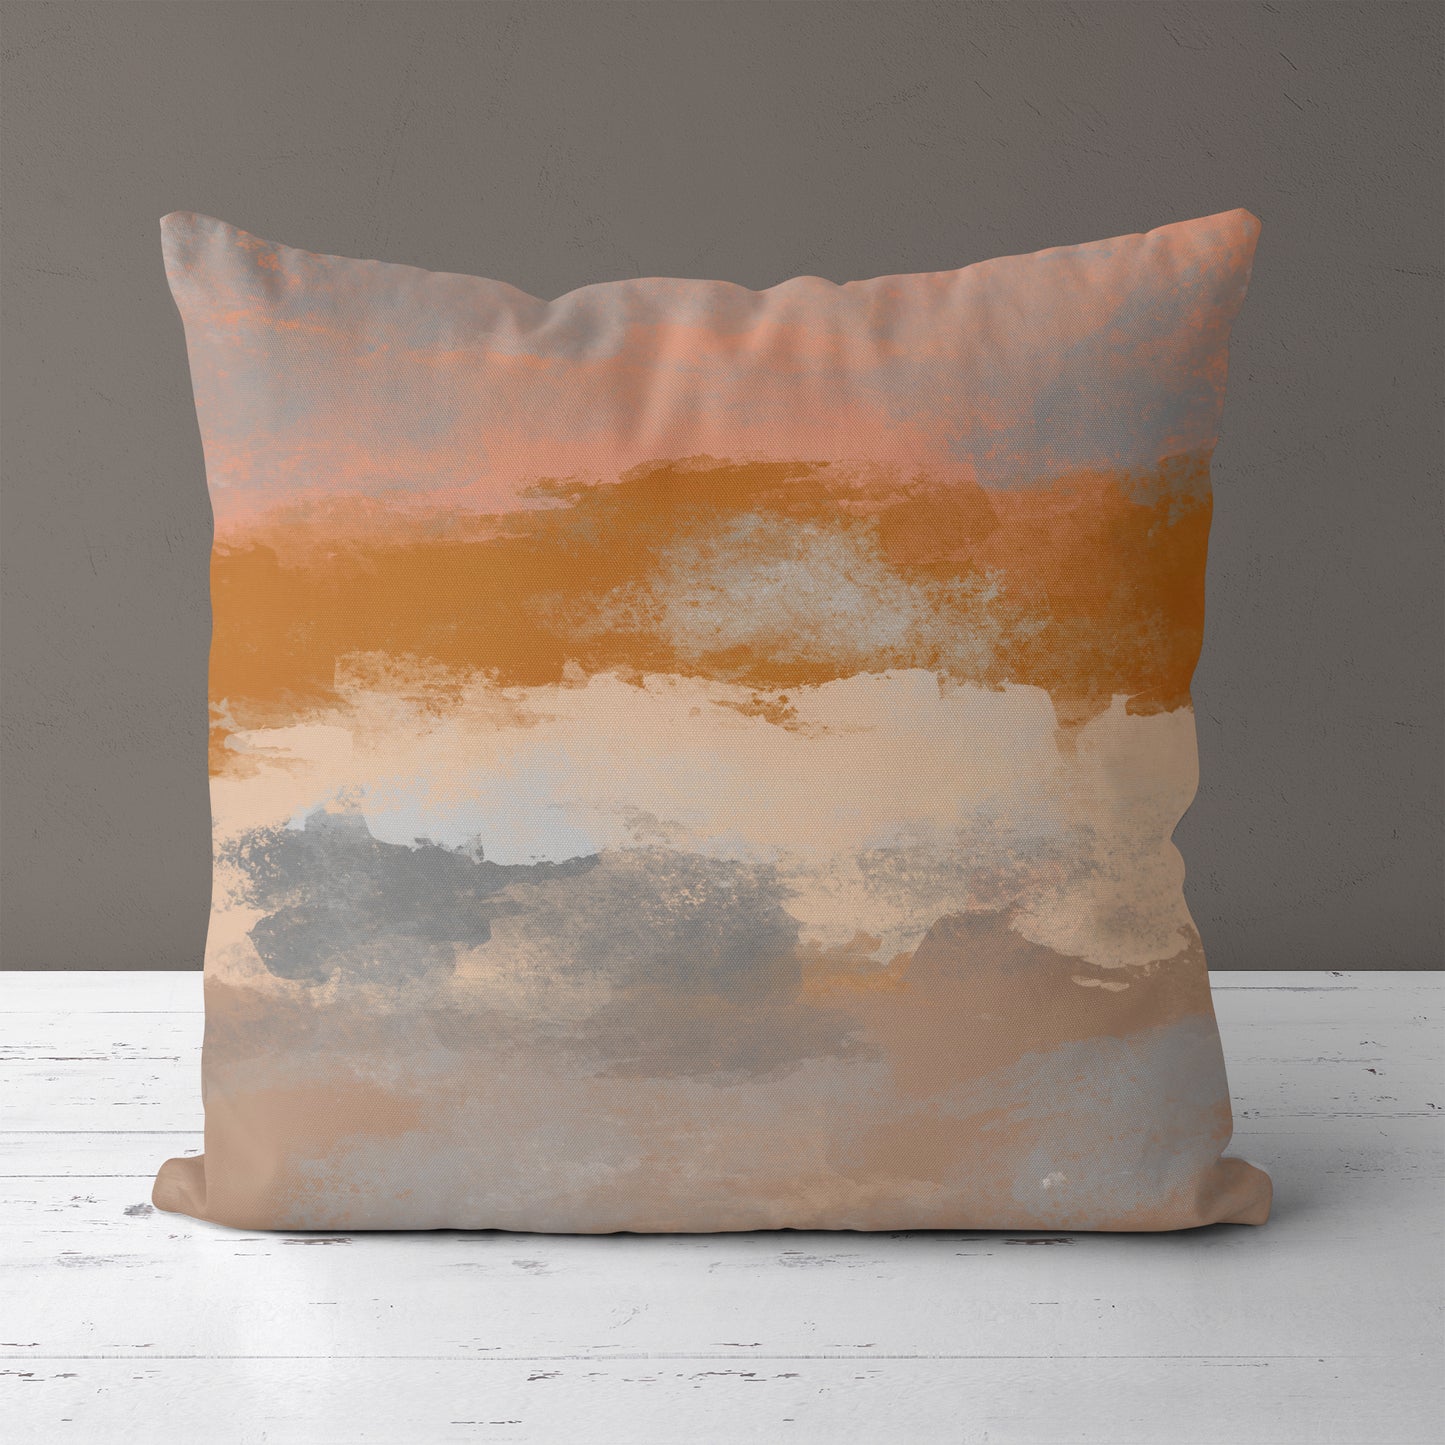 Throw Pillow with Abstract Handdrawn Sunset